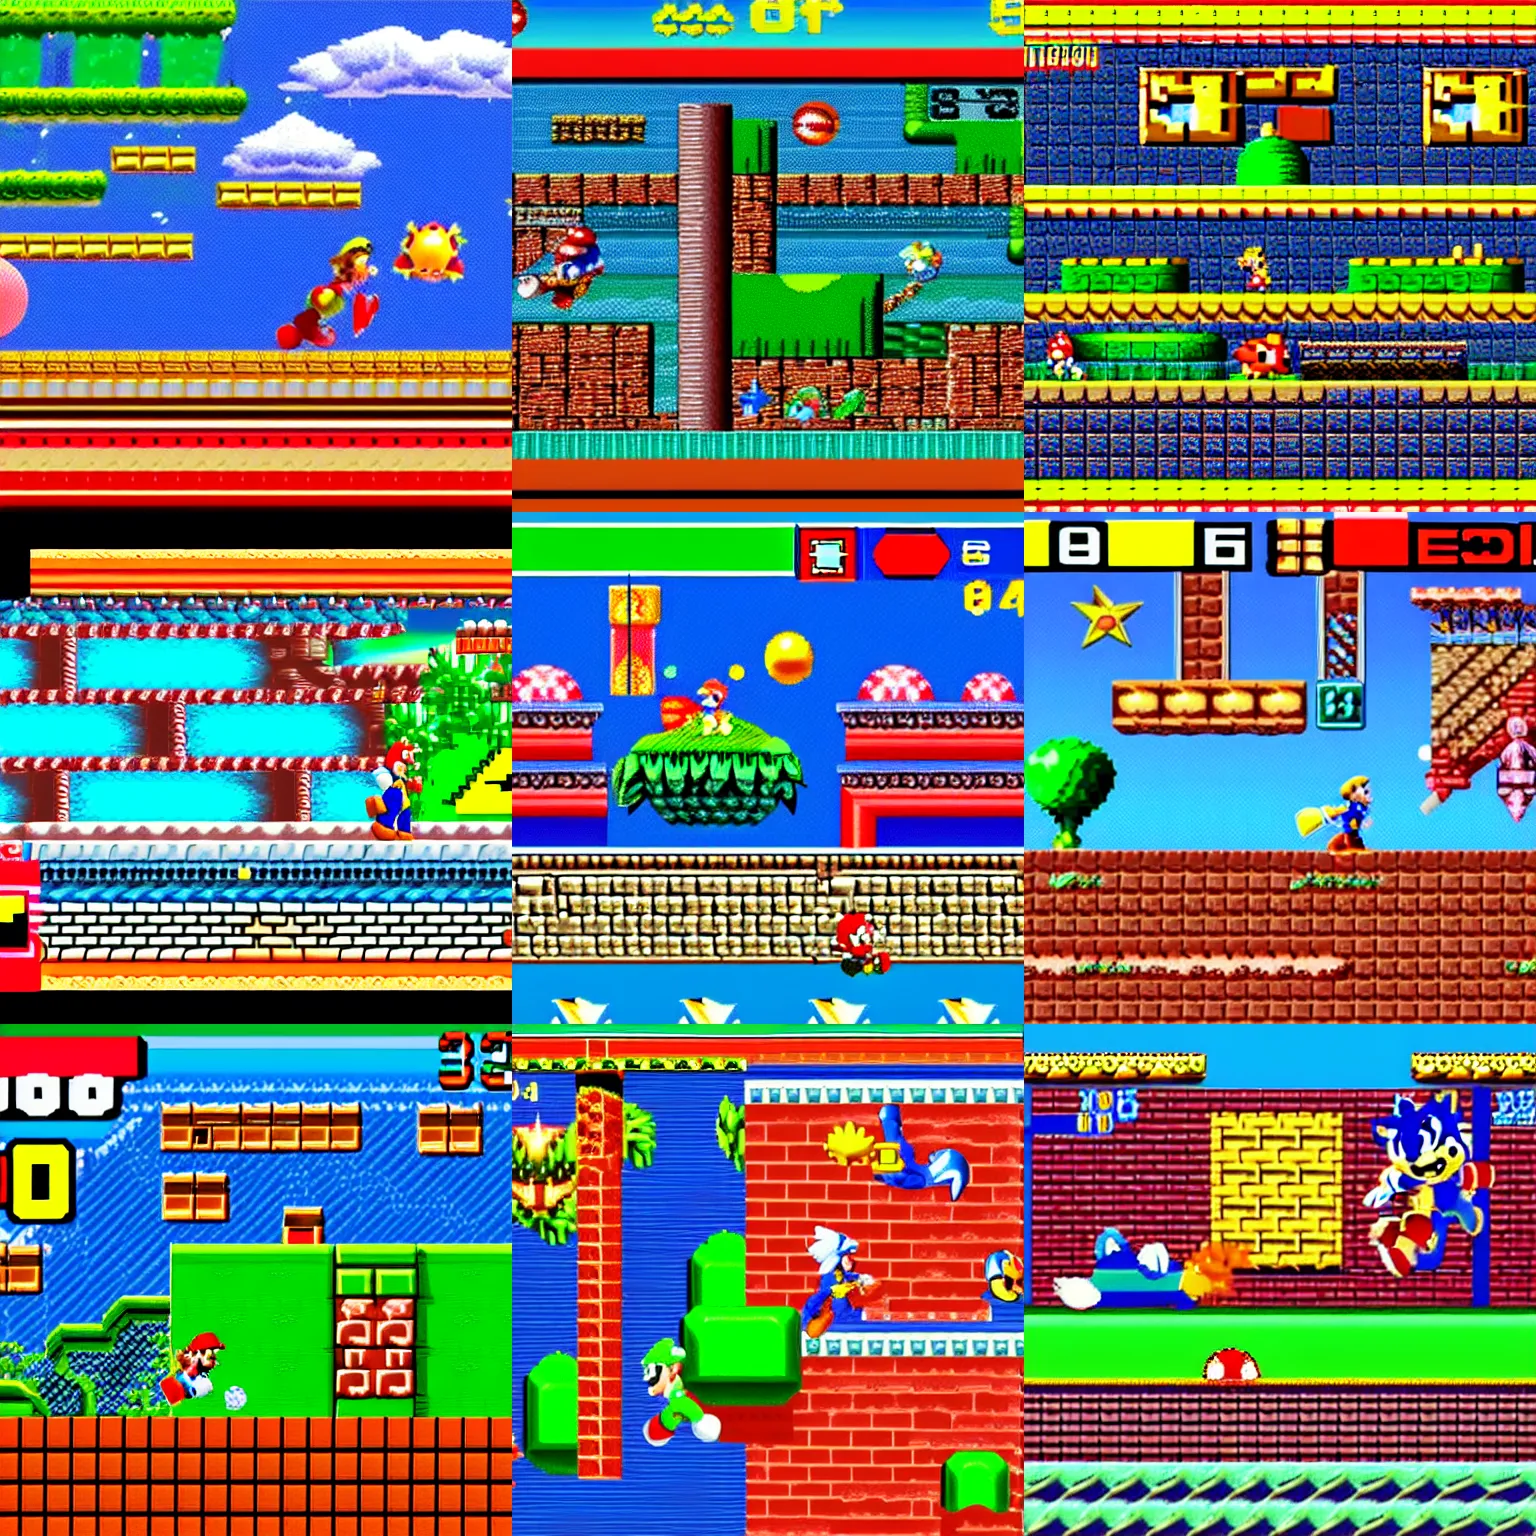 Prompt: a screenshot of super mario in sonic the hedgehog 2 for mega drive, 1 9 9 4